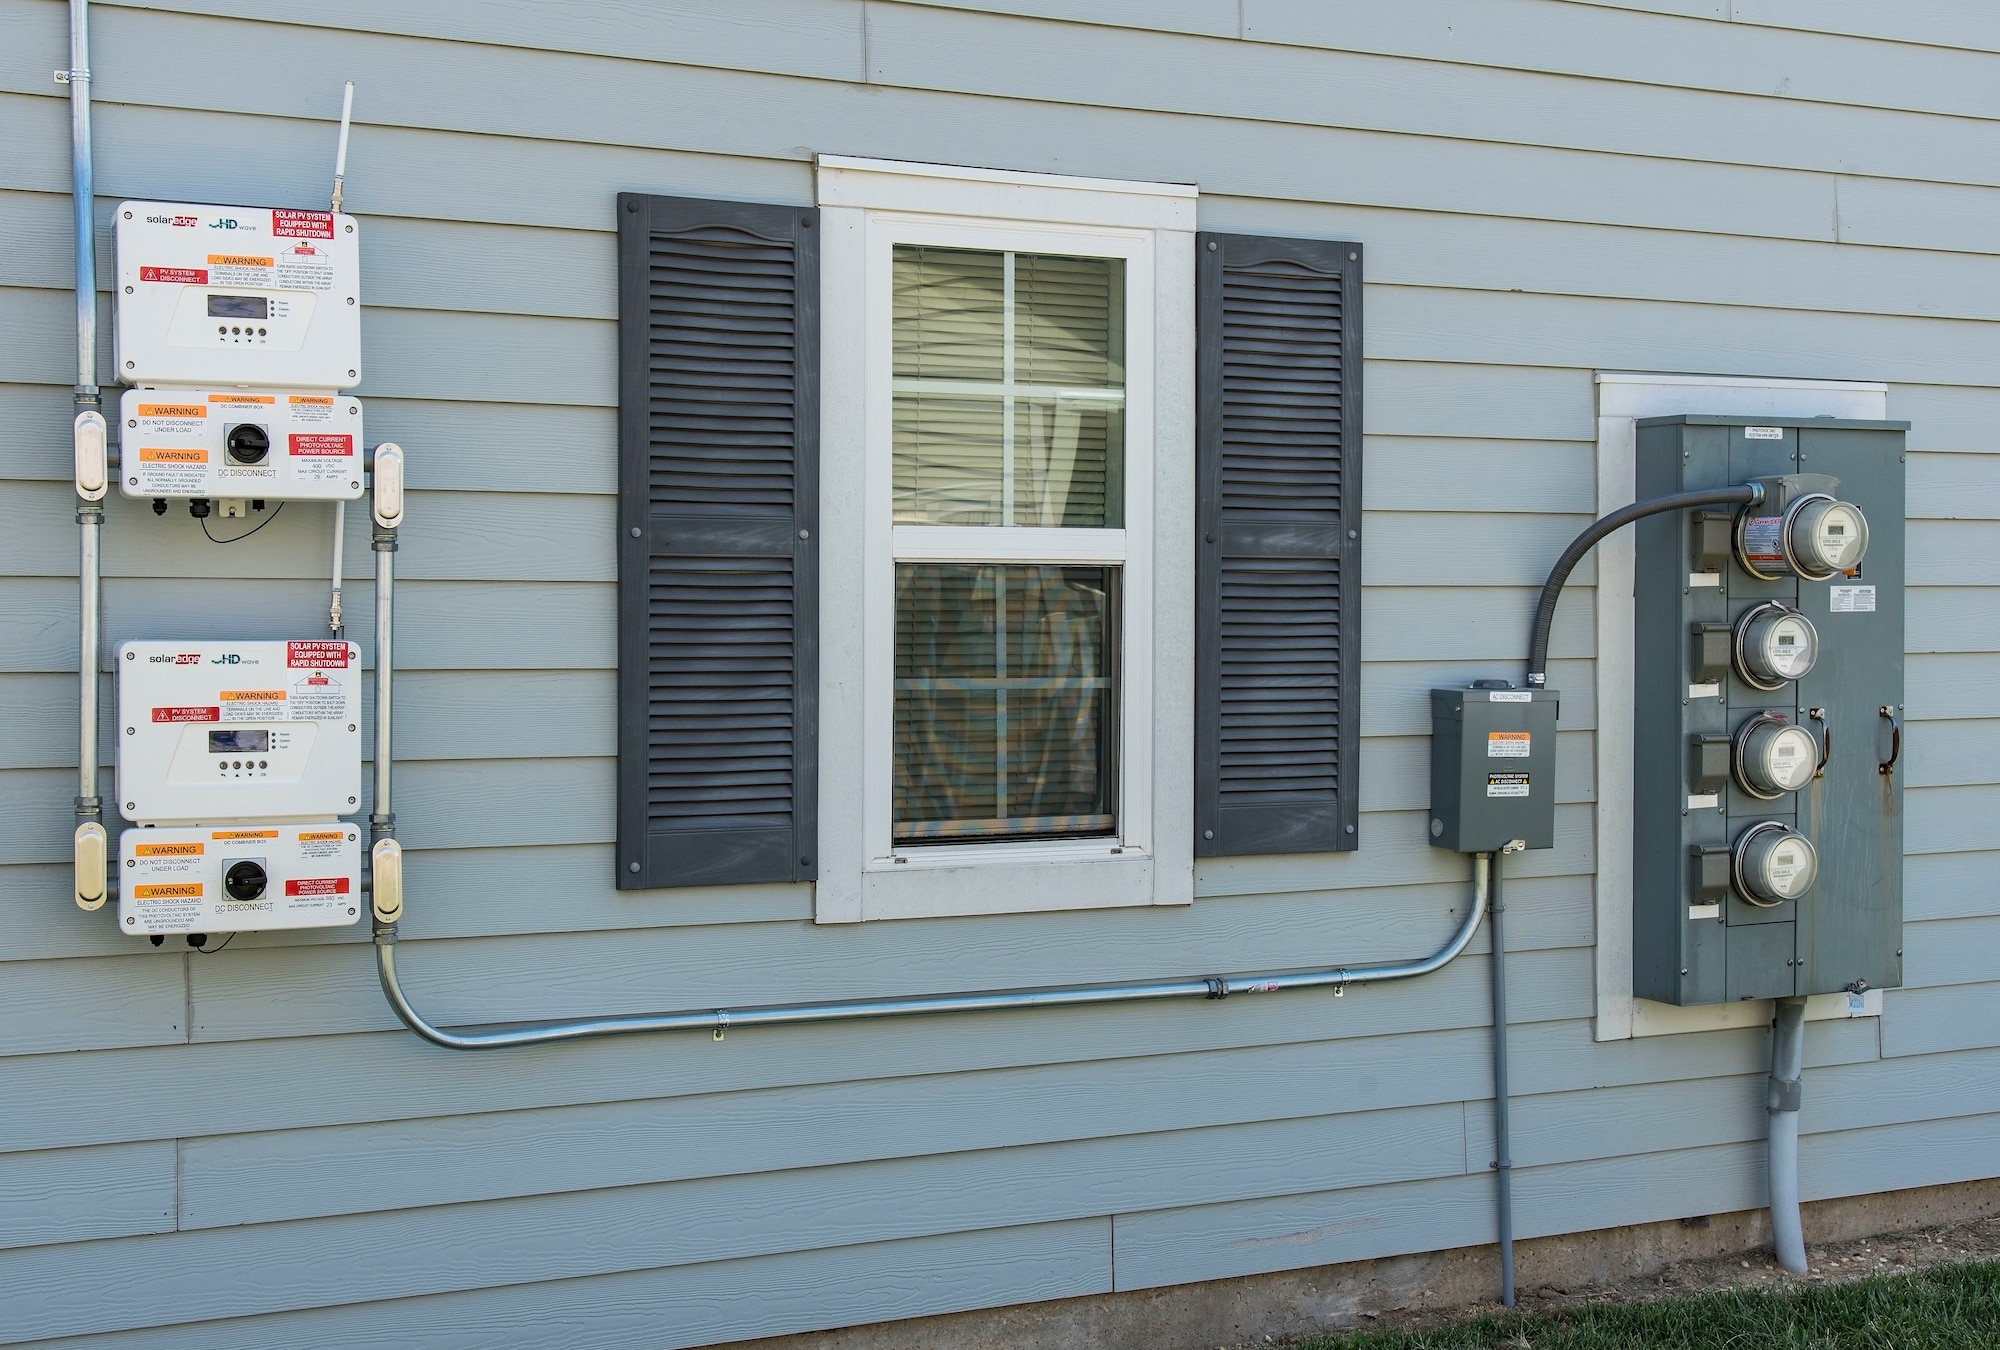 Electricity generated by photovoltaic (PV) panels is directed to inverter units prior to entering the electrical grid May 11, 2018, in the Dover Family Housing community at Dover Air Force Base, Del. Electricity generated by PV panels is transmitted to the electrical grid, not the individual house, thus reducing Hunt Military Communities’ cost for purchasing electricity from local sources. (U.S. Air Force photo by Roland Balik)